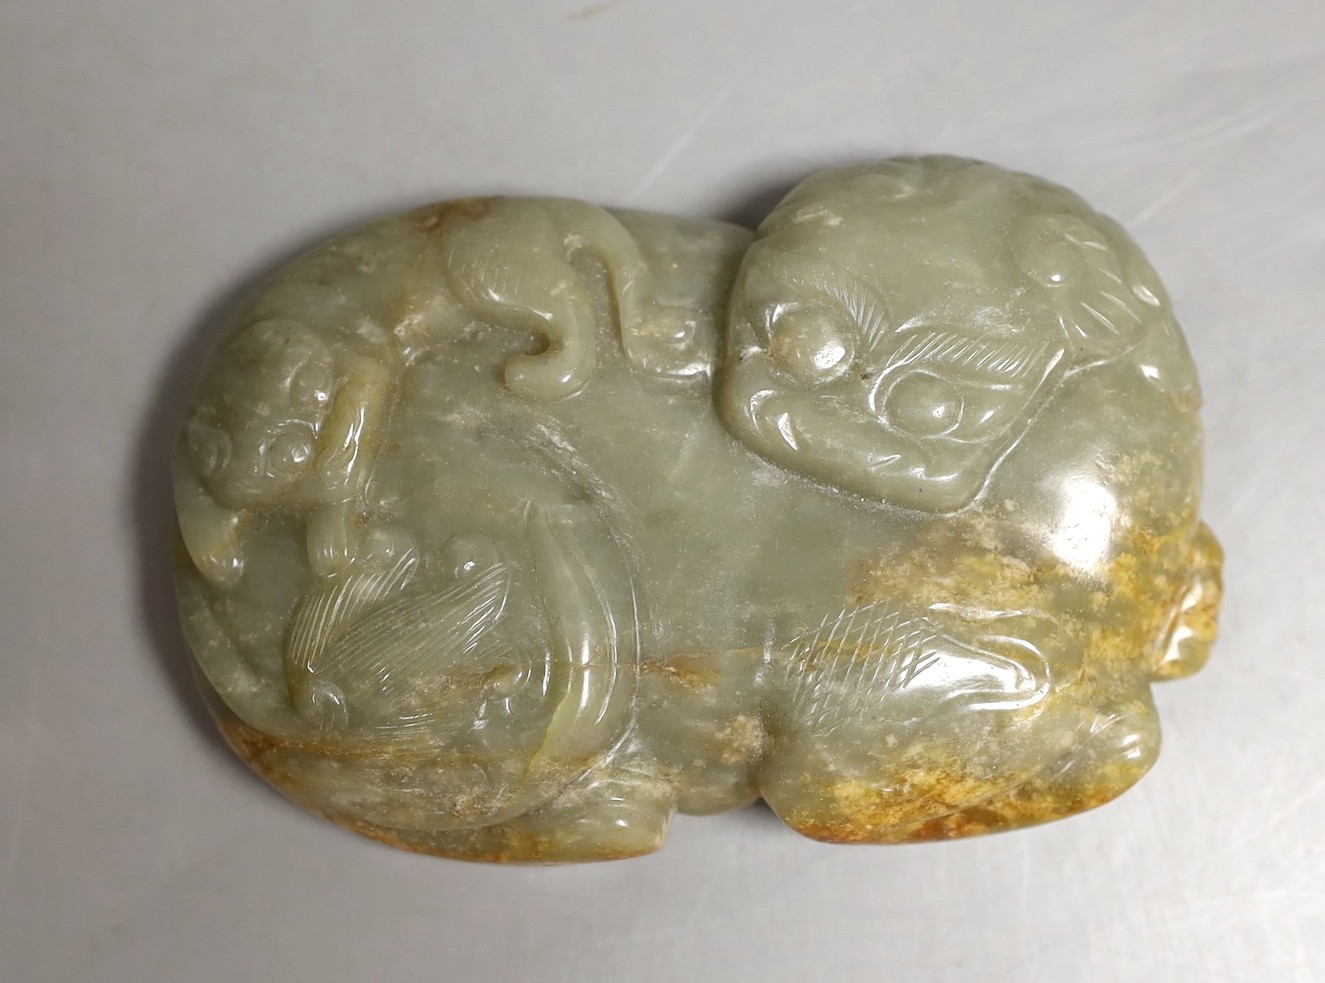 A Chinese celadon and a russet jade ‘lion dog and cub’ plaque, 11.5cm across